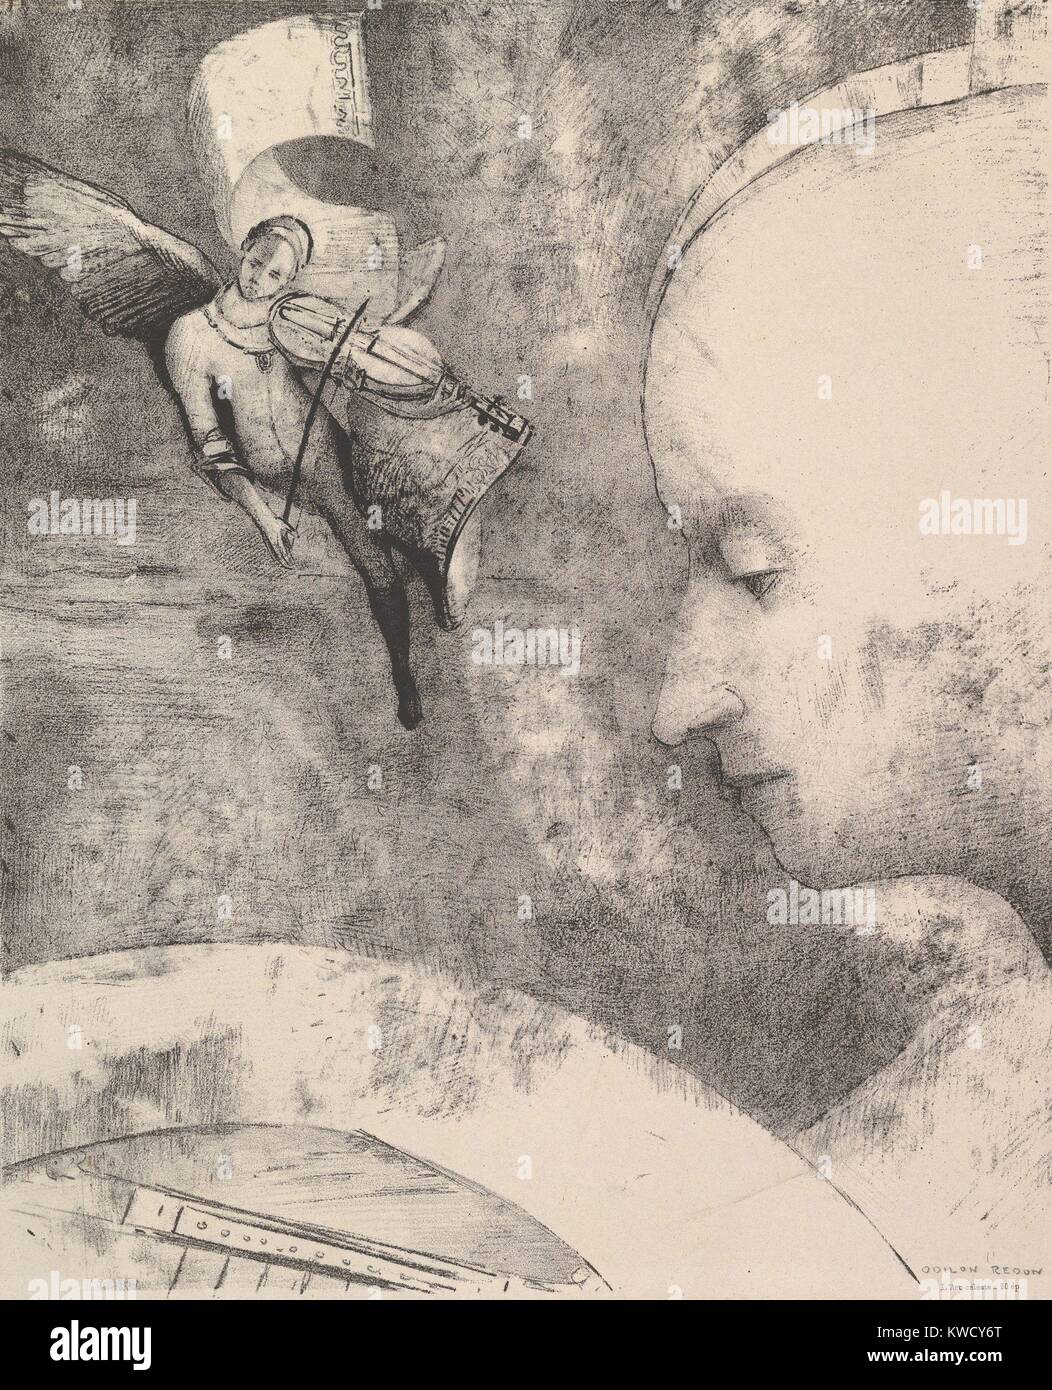 The Celestial Art, by Odilon Redon, 1894, French Symbolist print, lithograph. Anticipating Surrealism, Redons lithograph juxtaposed a floating winged figure playing a violin with an hairless human head looking down at an enigmatic object (BSLOC 2017 5 131) Stock Photo